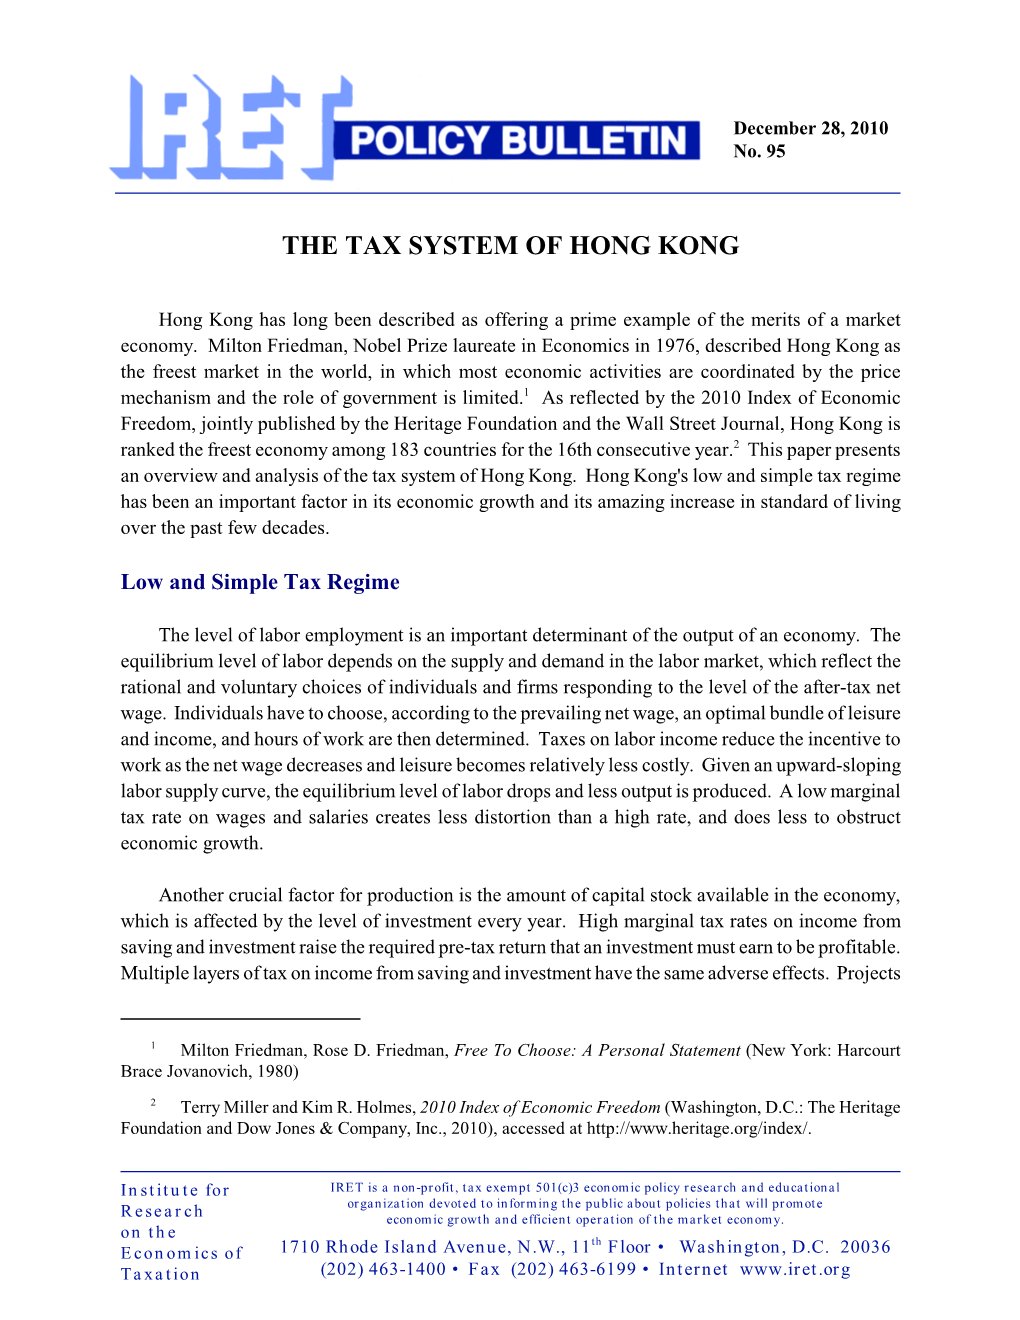 The Tax System of Hong Kong